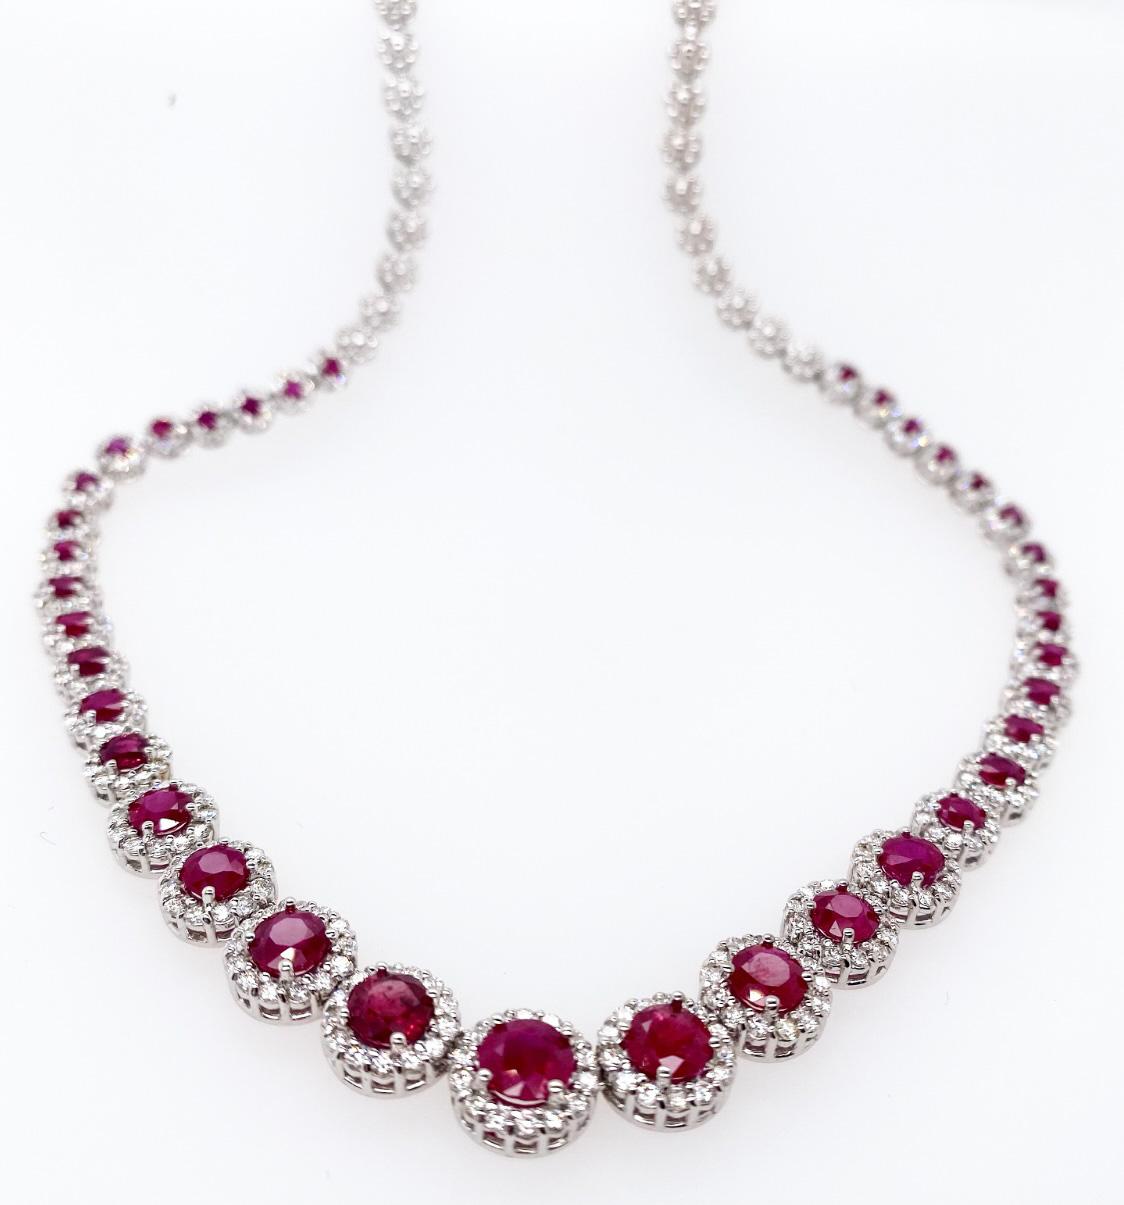 This beautiful necklace features a reddish, round-cut ruby accented by a halo of round brilliant-cut diamonds set in 18K white gold. The necklace consisting of thirty-seven ruby graduating with diamond clusters. This beautiful necklace is the right